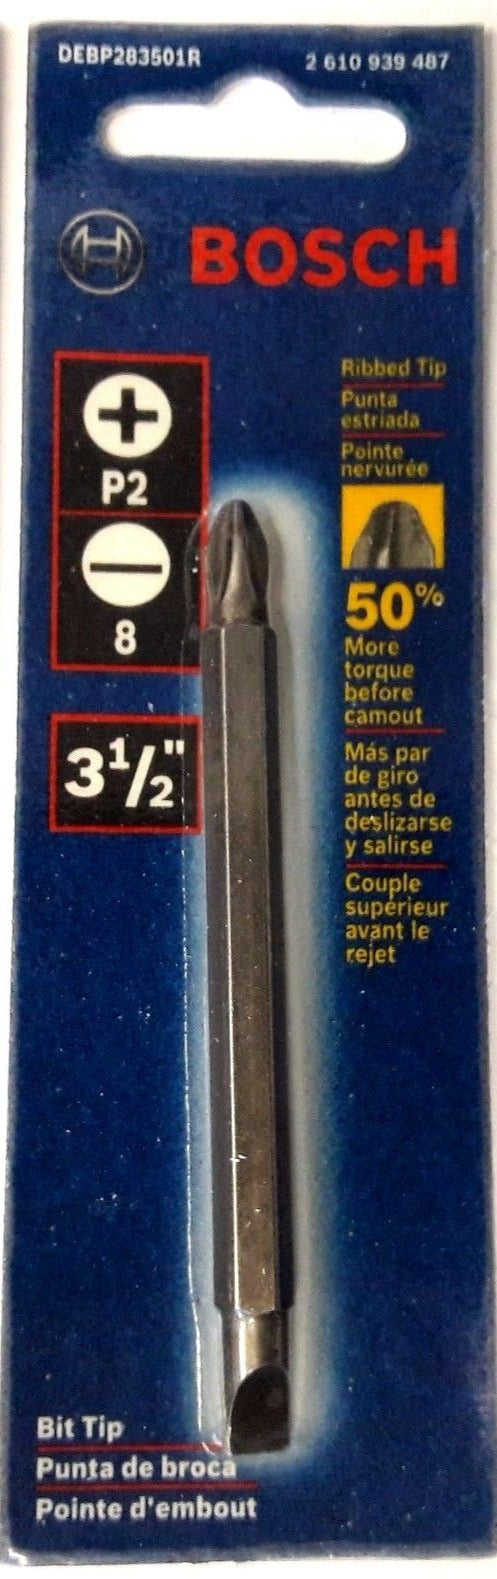 Bosch DEBP283501R 3-1/2" #2 Phillips & Slotted Double-Ended Insert Bit USA #11